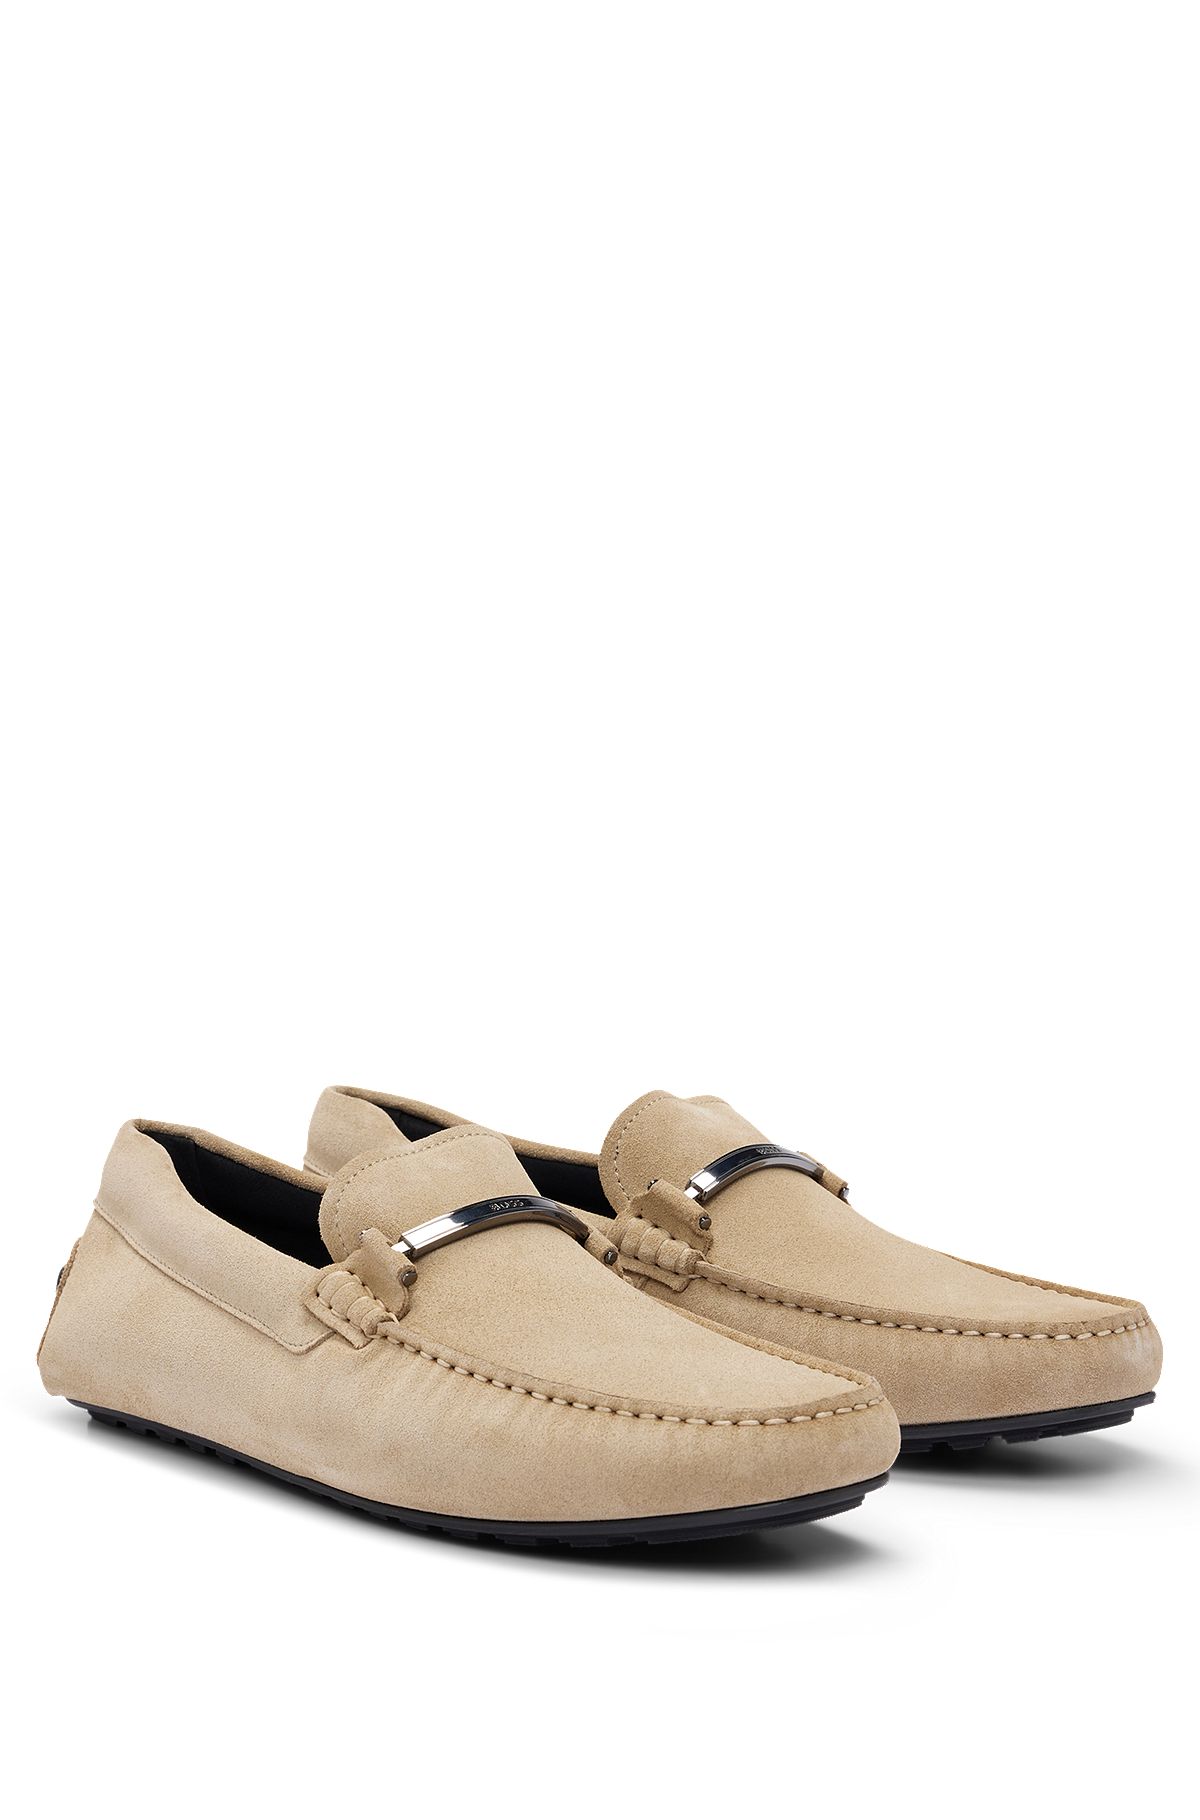 Suede moccasins with branded hardware and full lining, Khaki